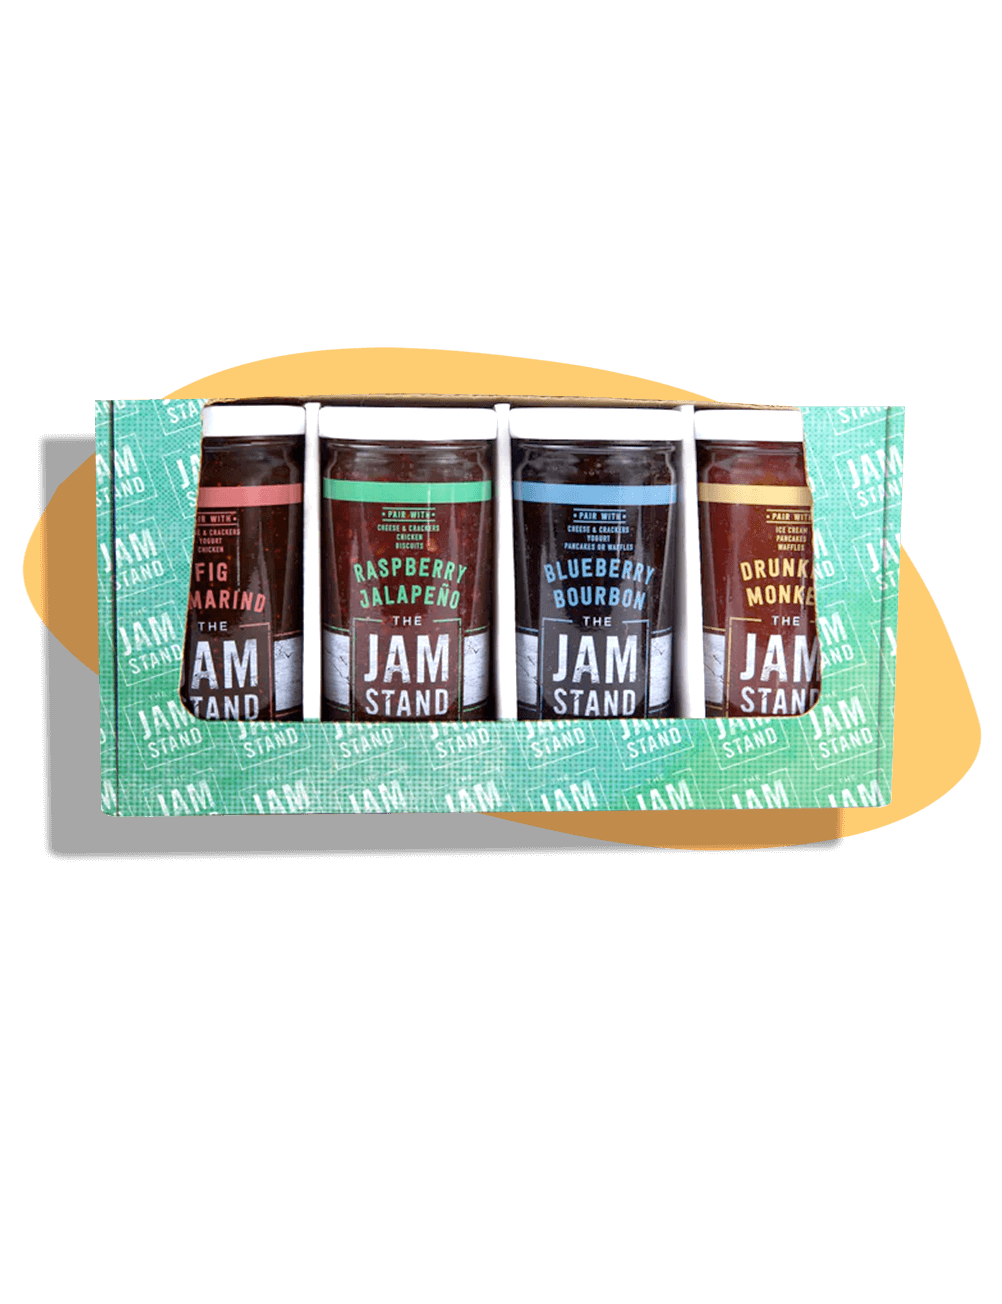 MAKE YOUR 4 JAMS A GIFT FOR $4!